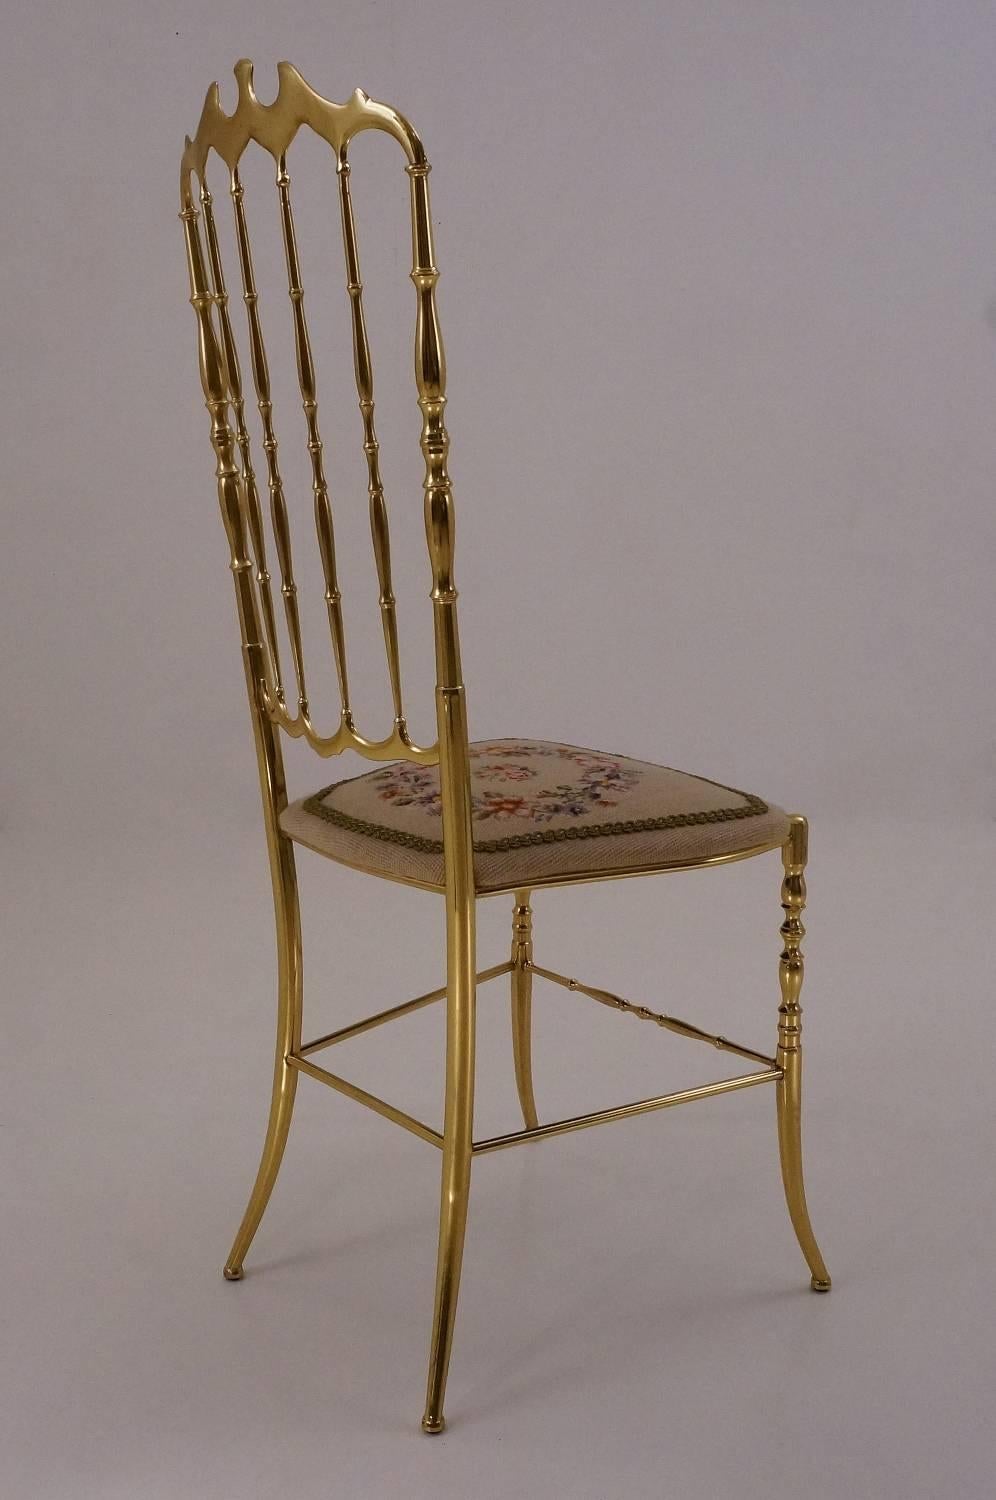 Needlepoint Chiavari Solid Brass Chair, Needle Point Seat and High Back, circa 1950s Italian